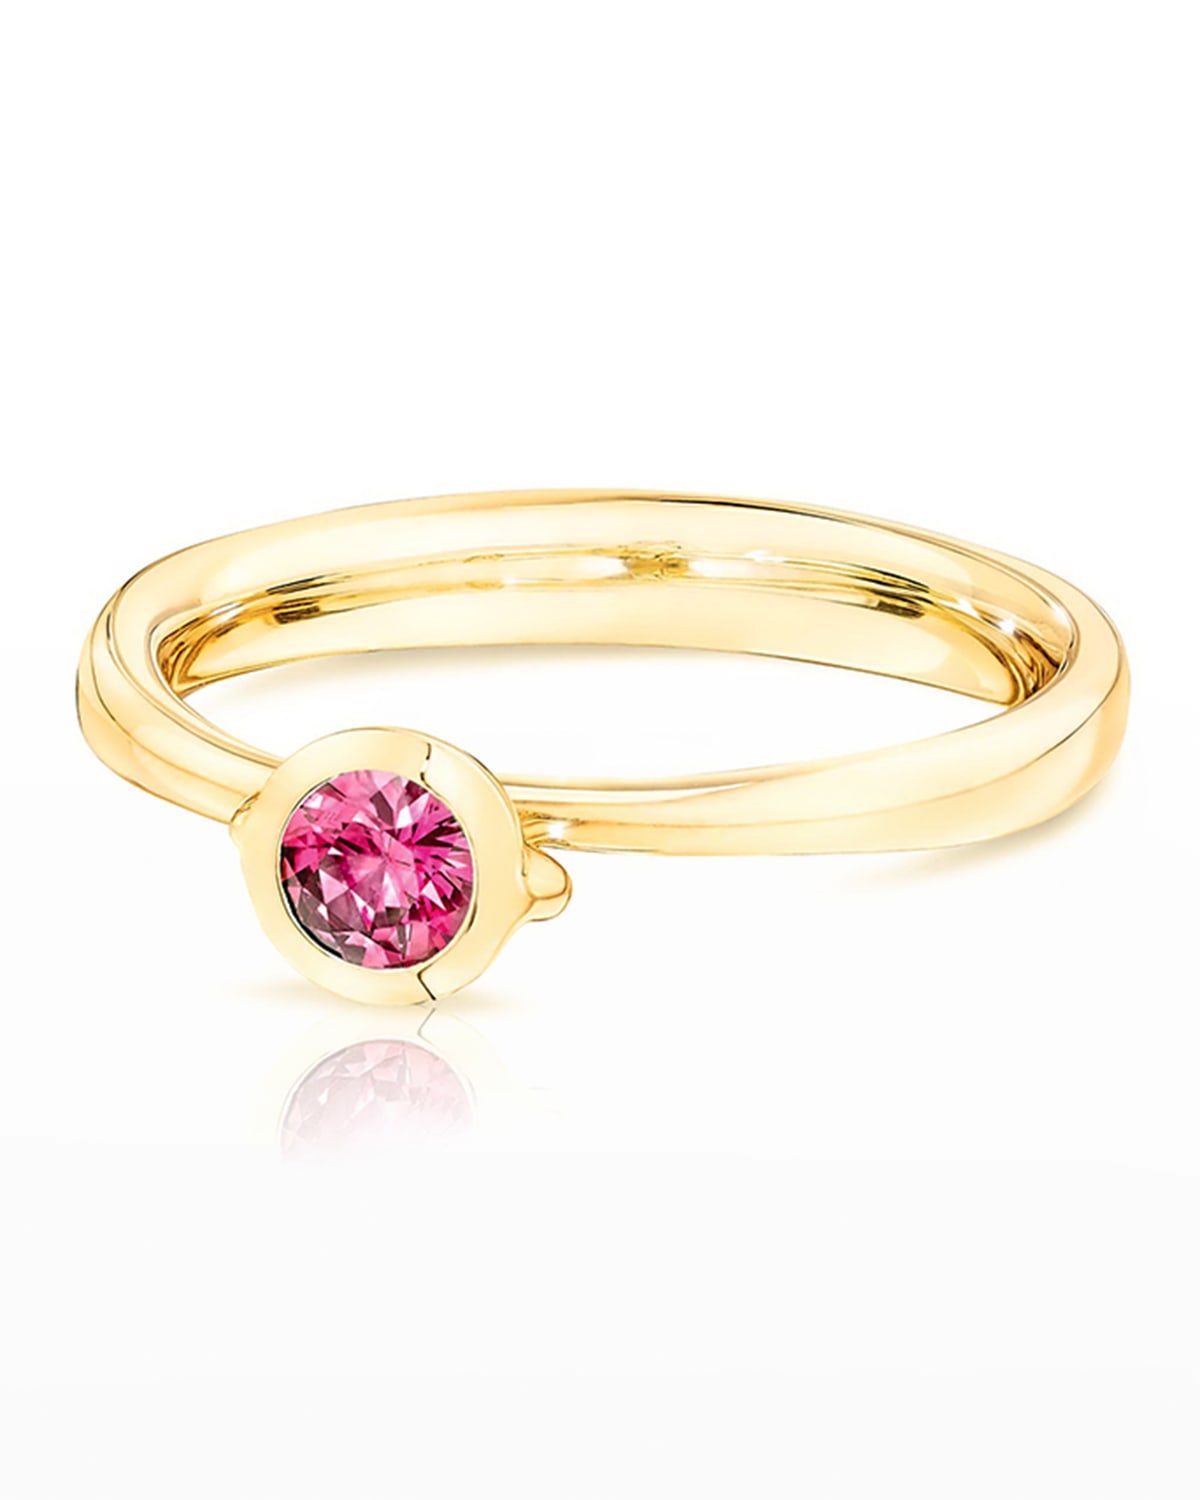 18k Yellow Gold Pink Spinel Solitaire Ring, Size 6.5